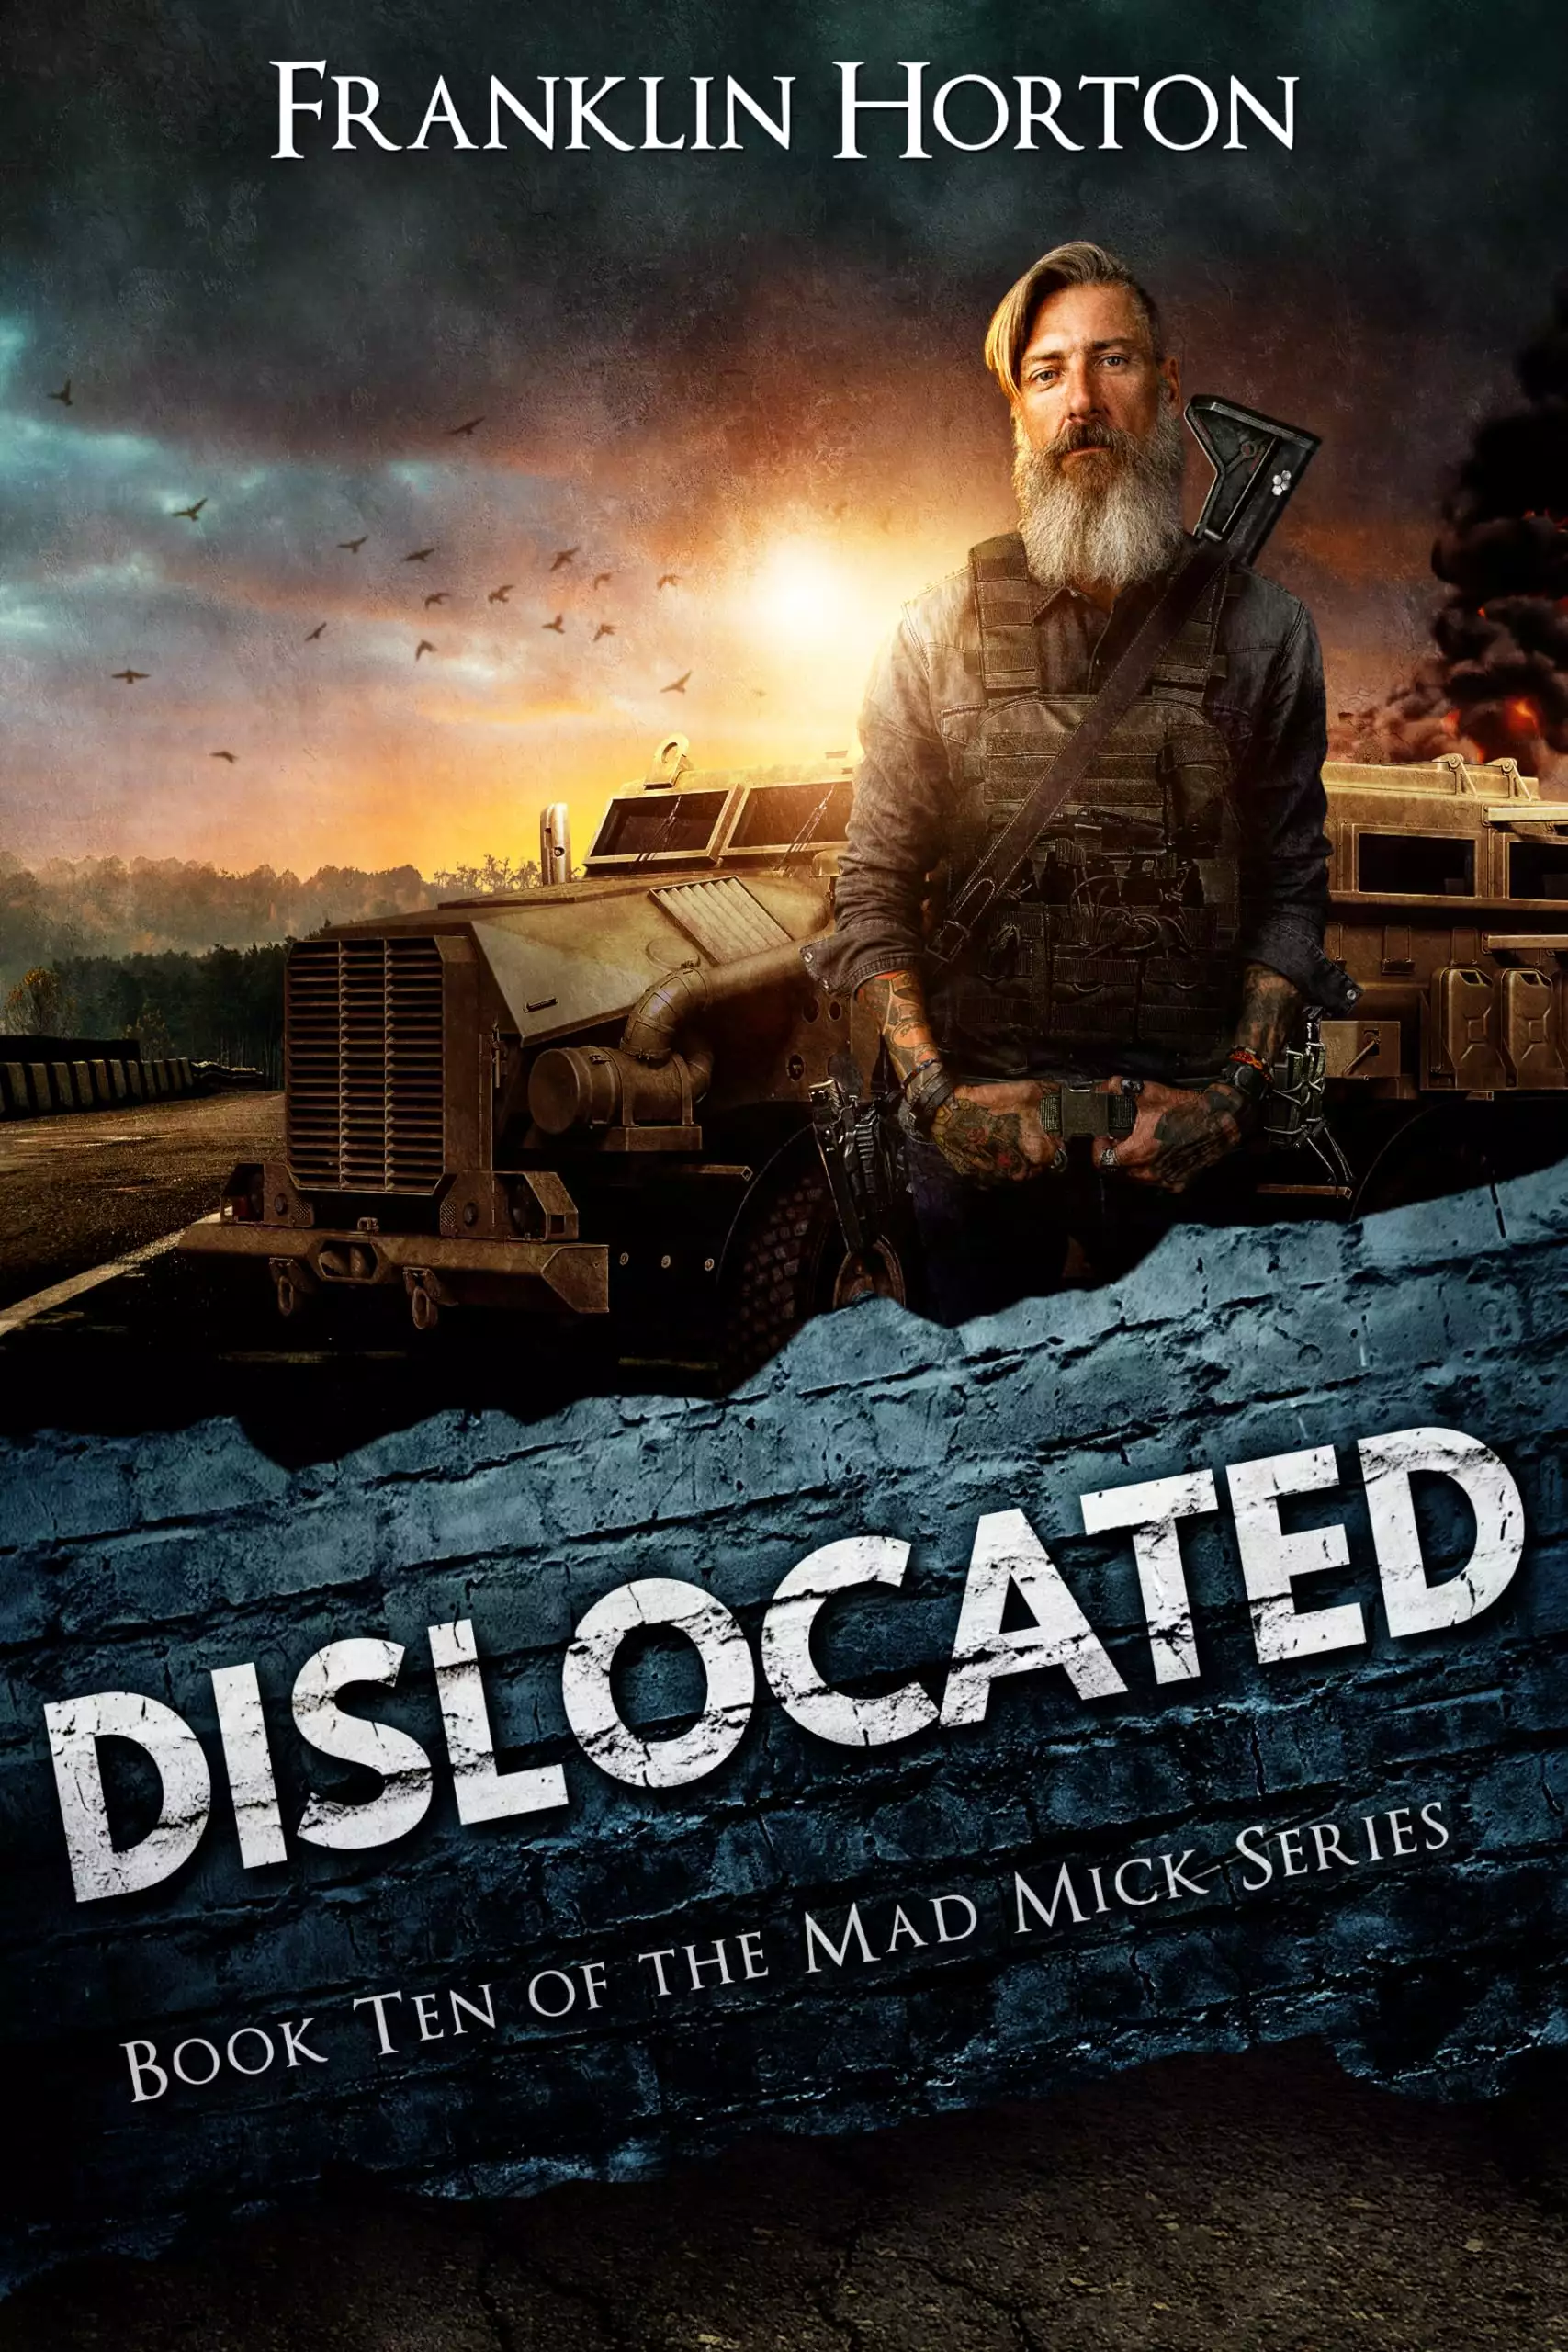 Dislocated: Book Ten in The Mad Mick Series